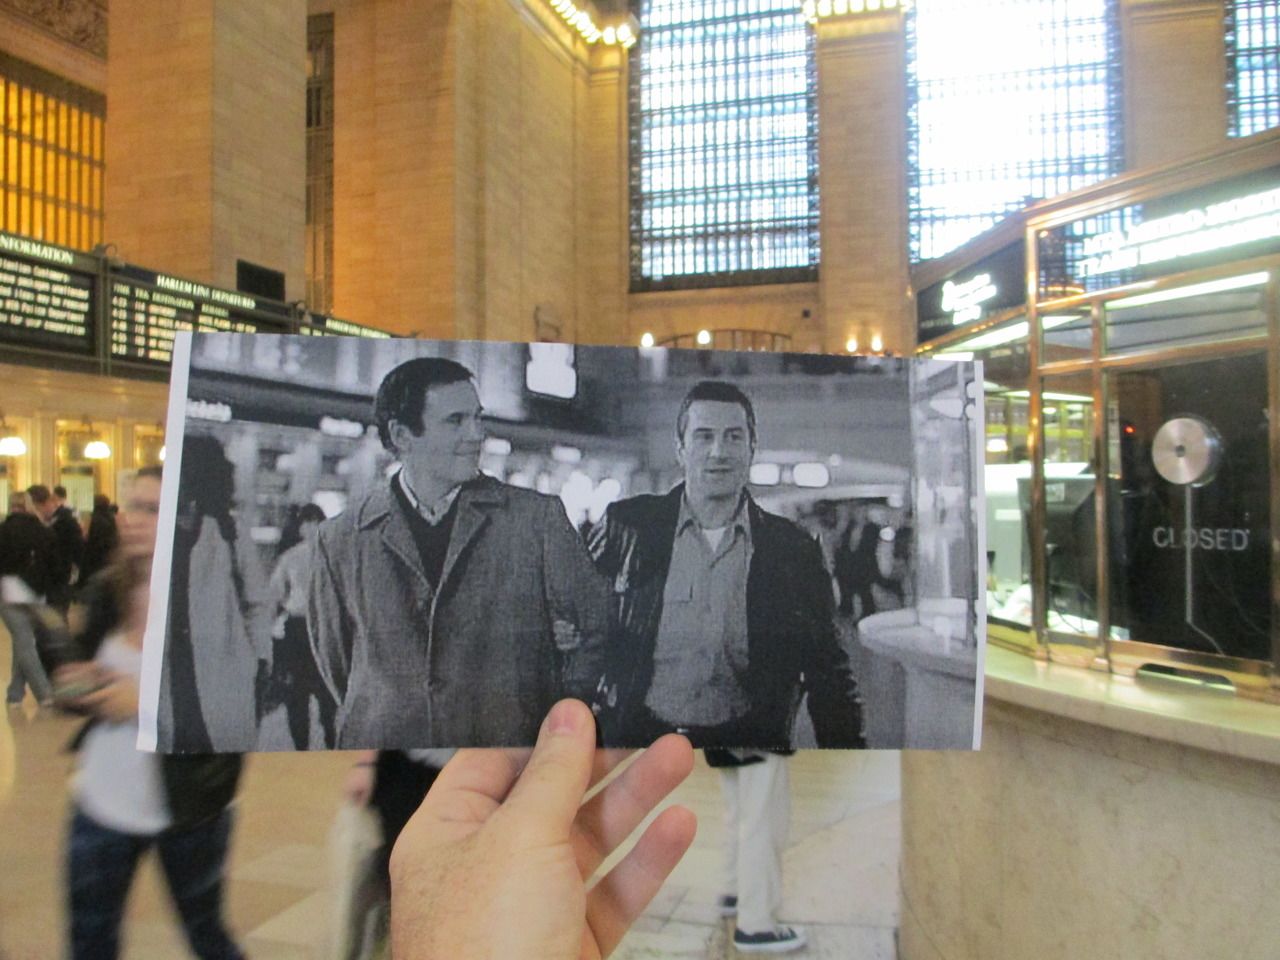 Bounty hunter Jack Walsh (Robert DeNiro) leads Jonathan "The Duke" Mardukas (Charles Grodin) through Grand Central Terminal. The terminal also makes appearances in dozens of films including "Hackers," "Eternal Sunshine of the Spotless Mind," "Revolutionary Road" and "Armageddon" (when it's destroyed).